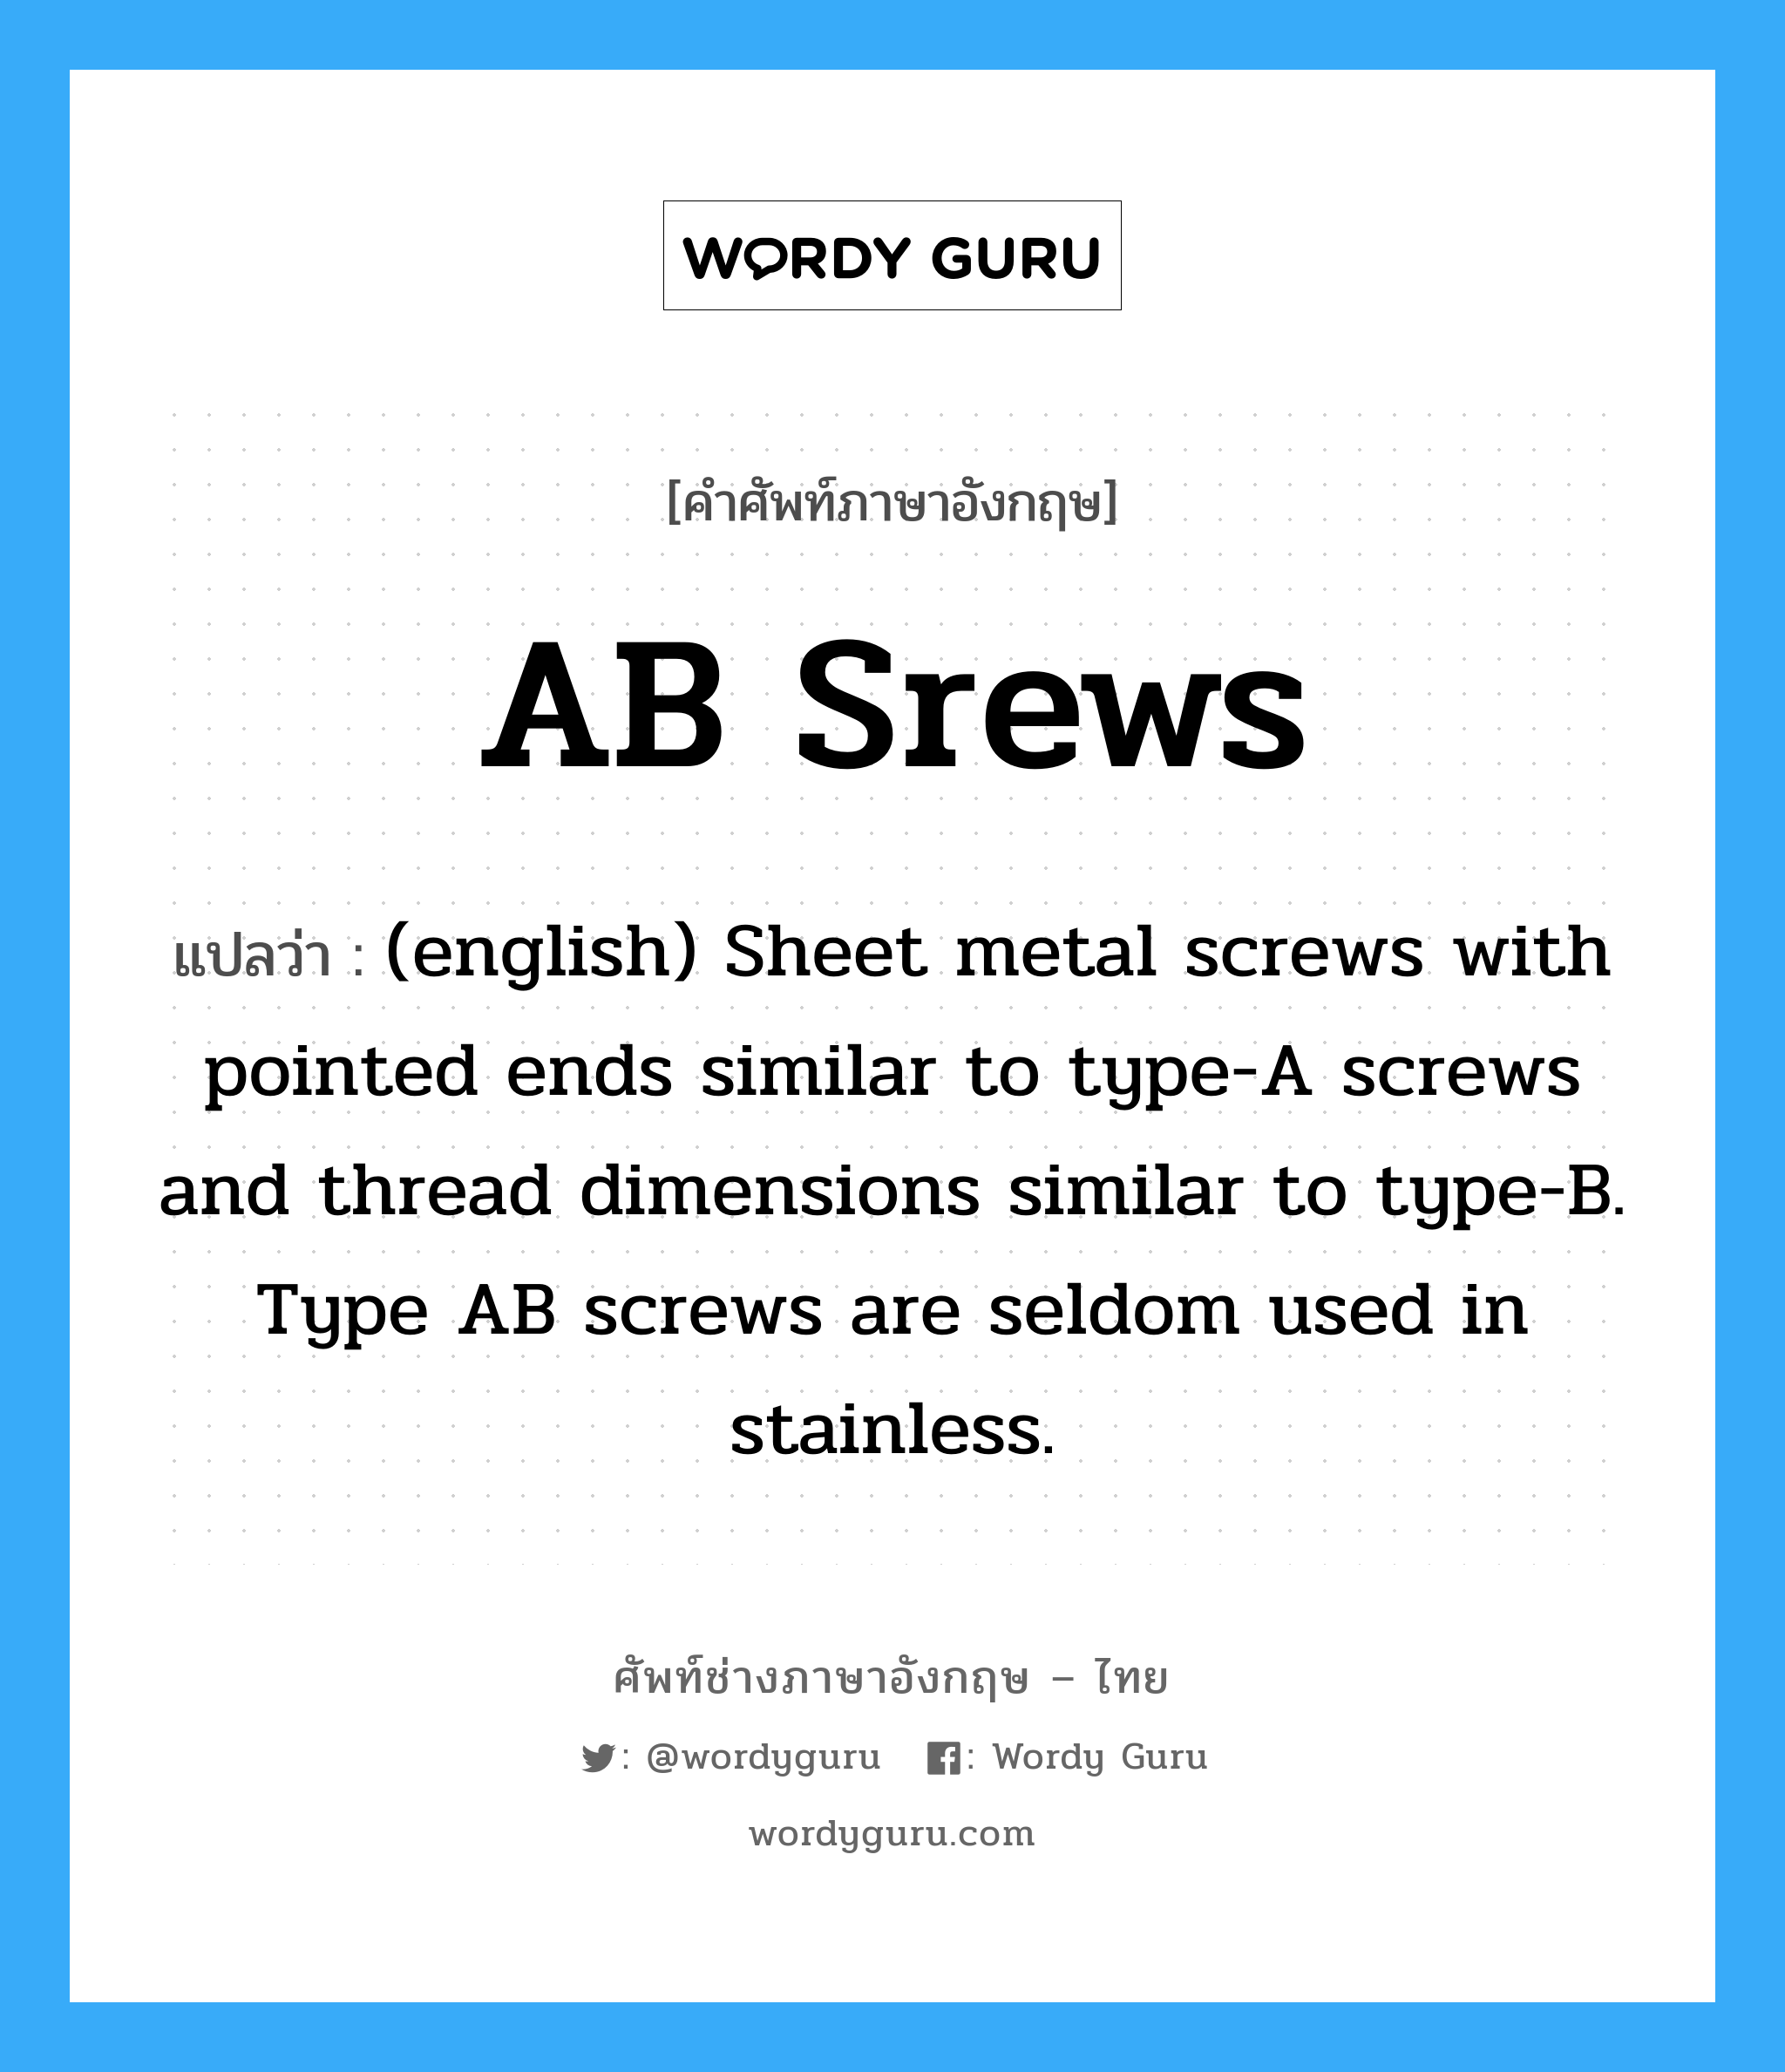 AB Srews แปลว่า?, คำศัพท์ช่างภาษาอังกฤษ - ไทย AB Srews คำศัพท์ภาษาอังกฤษ AB Srews แปลว่า (english) Sheet metal screws with pointed ends similar to type-A screws and thread dimensions similar to type-B. Type AB screws are seldom used in stainless.